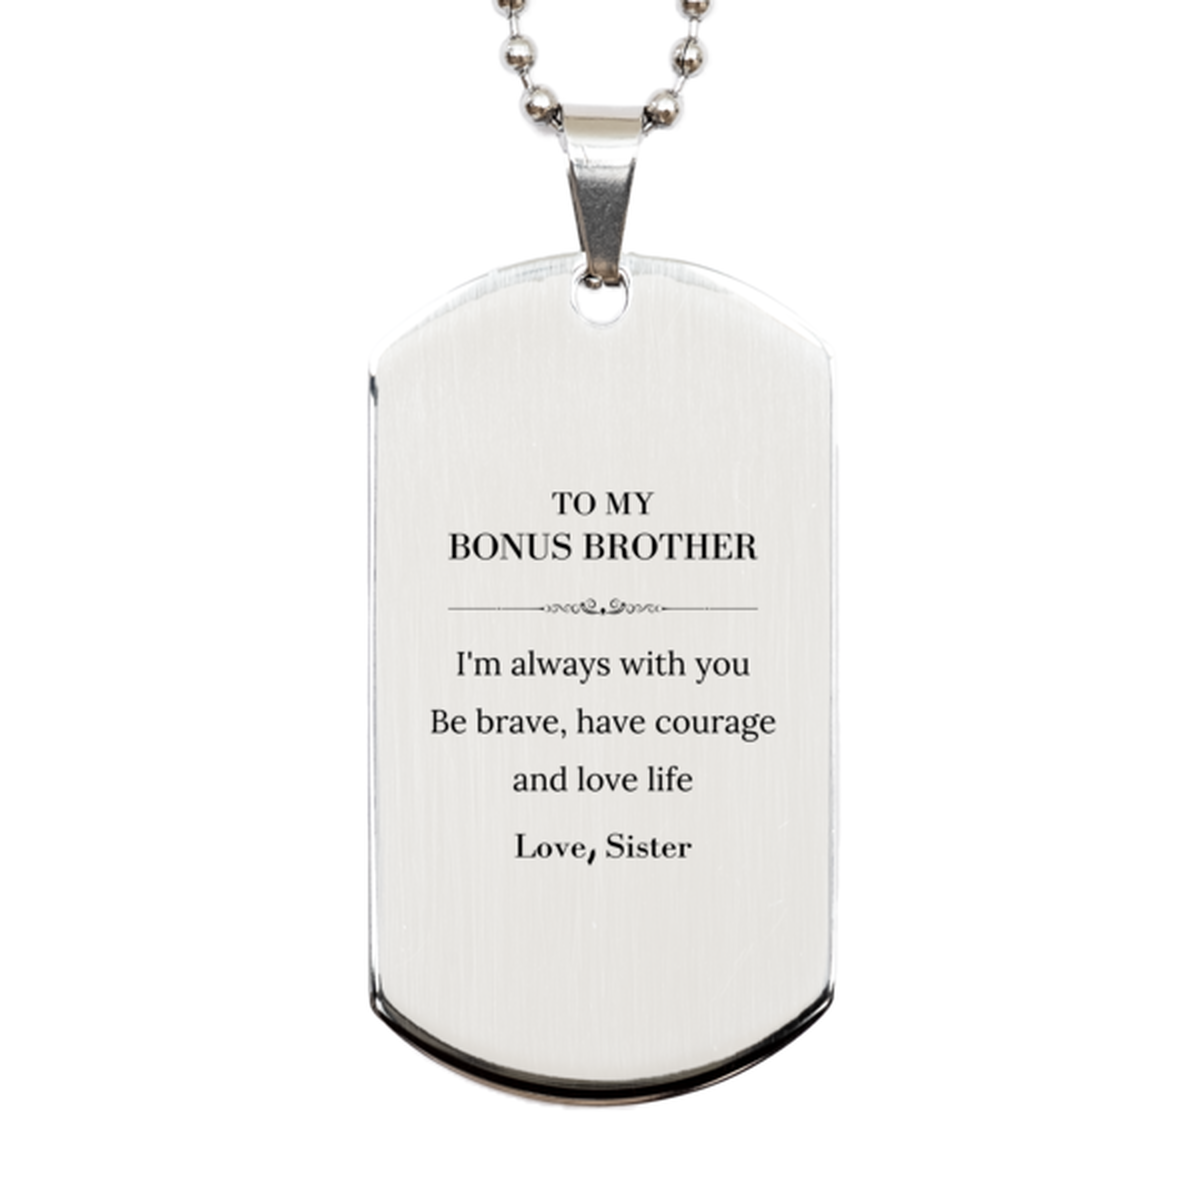 To My Bonus Brother Gifts from Sister, Unique Silver Dog Tag Inspirational Christmas Birthday Graduation Gifts for Bonus Brother I'm always with you. Be brave, have courage and love life. Love, Sister